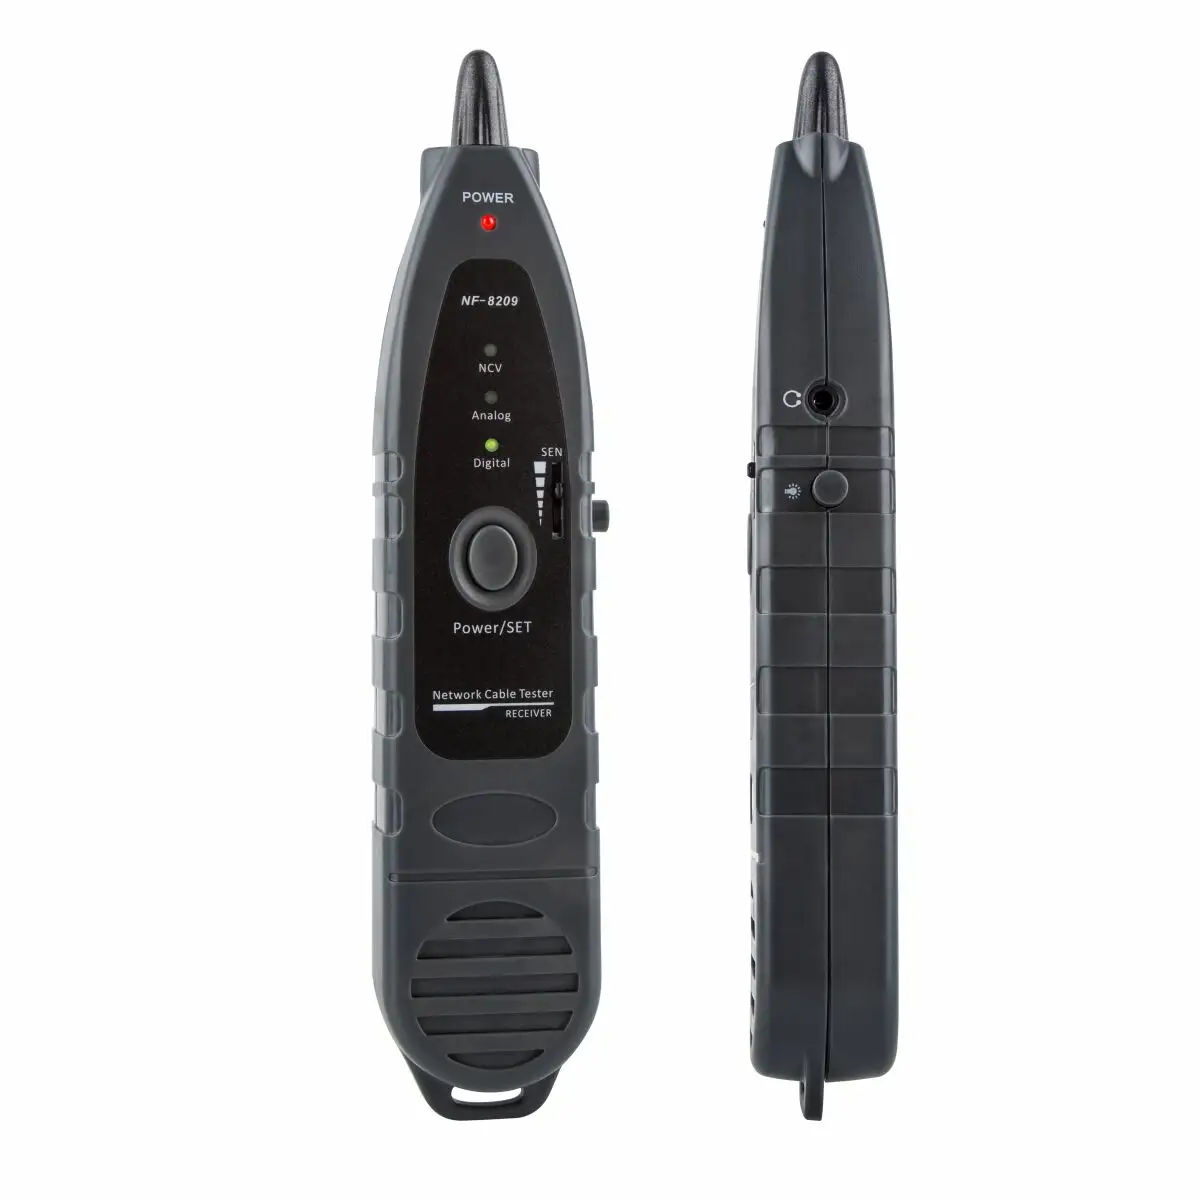 NF-8209 Network cable tester Measure Cable Length POE Wire Checker Cat5 Cat6 Test Network Scan Tool Wiremap Tester